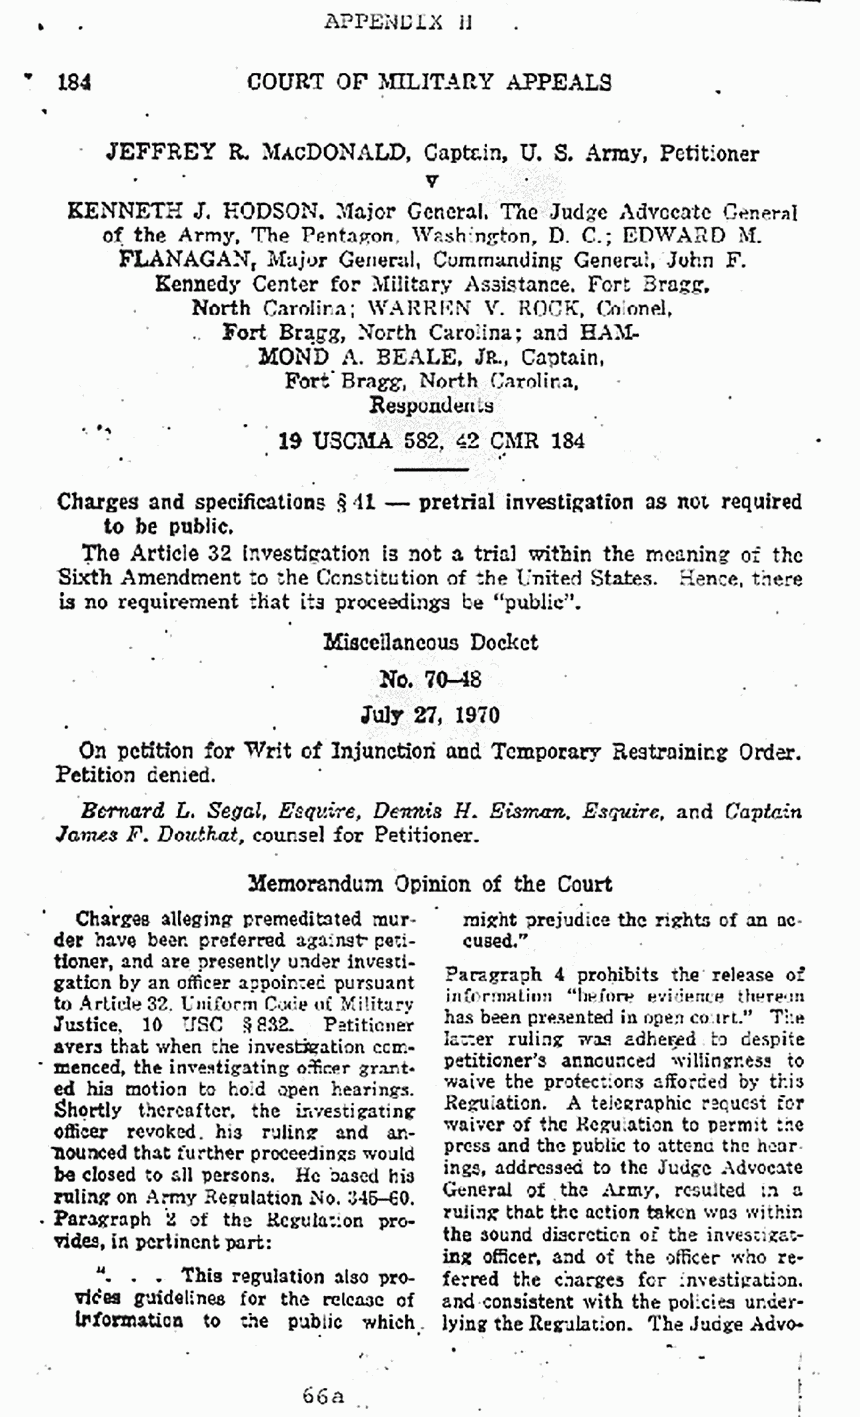 July 27, 1970: Memorandum Opinion of the U.S. Court of Military Appeals, denying petition by Jeffrey MacDonald for Writ of Injunction and Temporary Restraining Order, p. 1 of 2